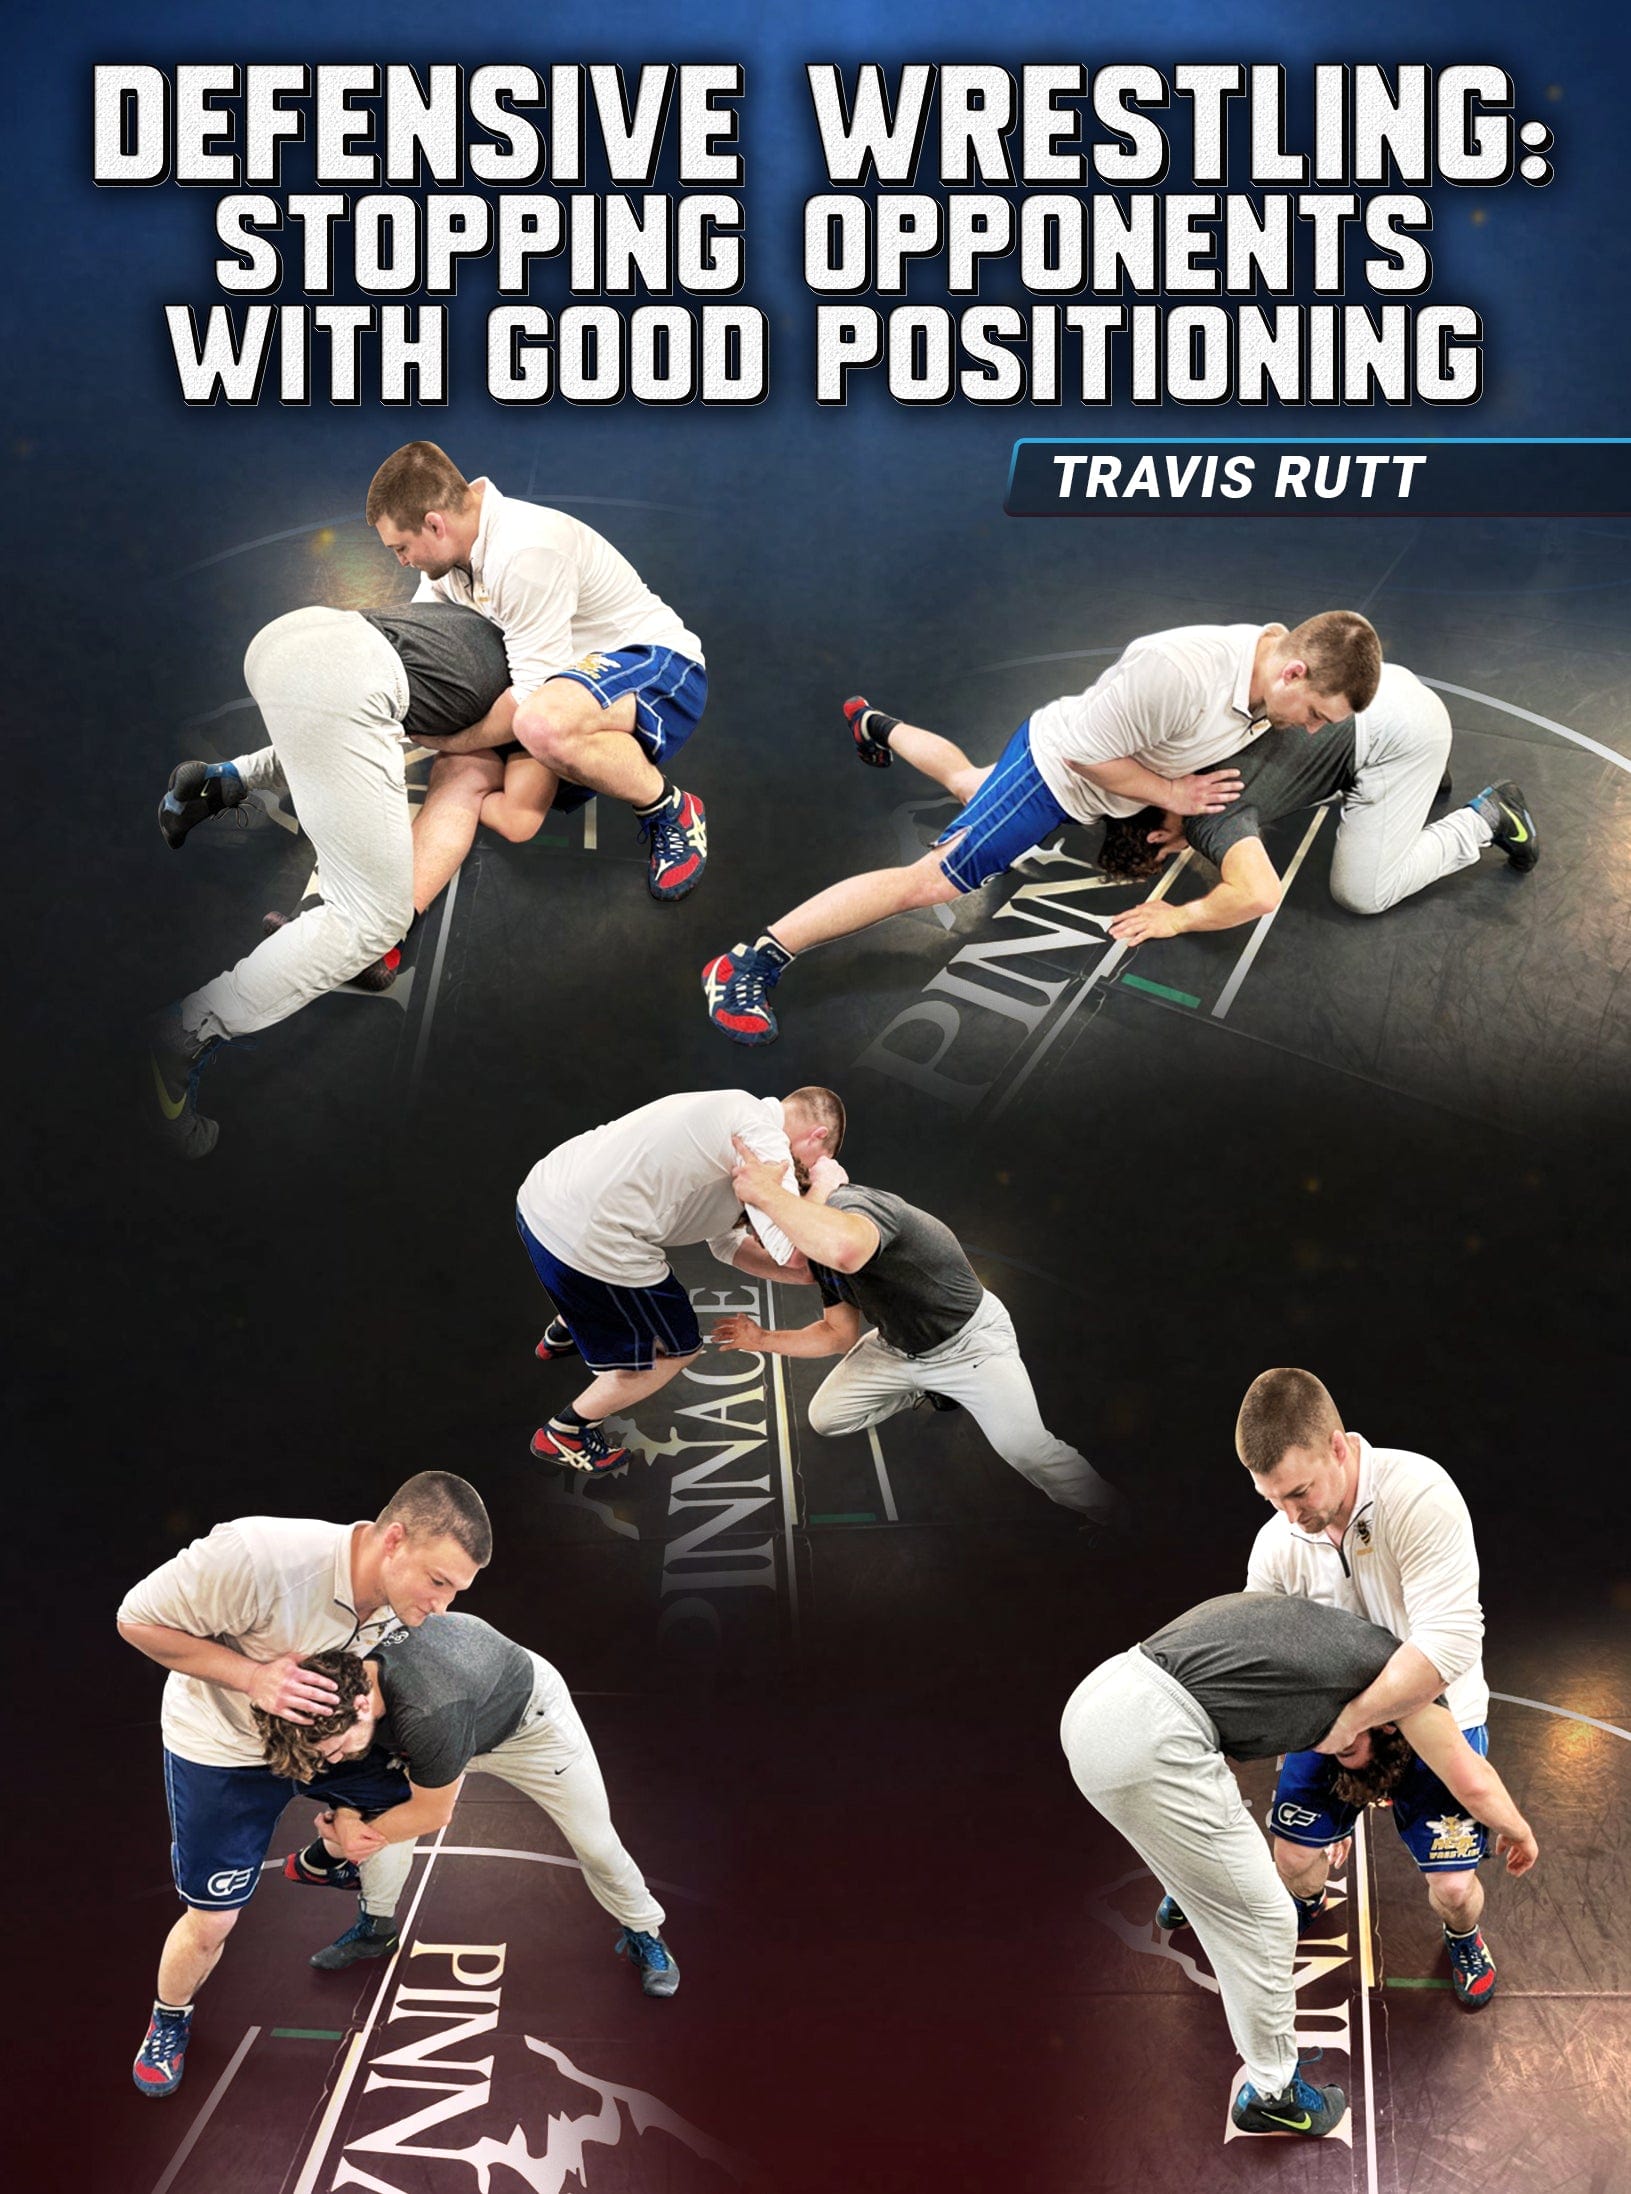 Defensive Wrestling: Stopping Opponents With Good Positioning by Travis Rutt - Fanatic Wrestling